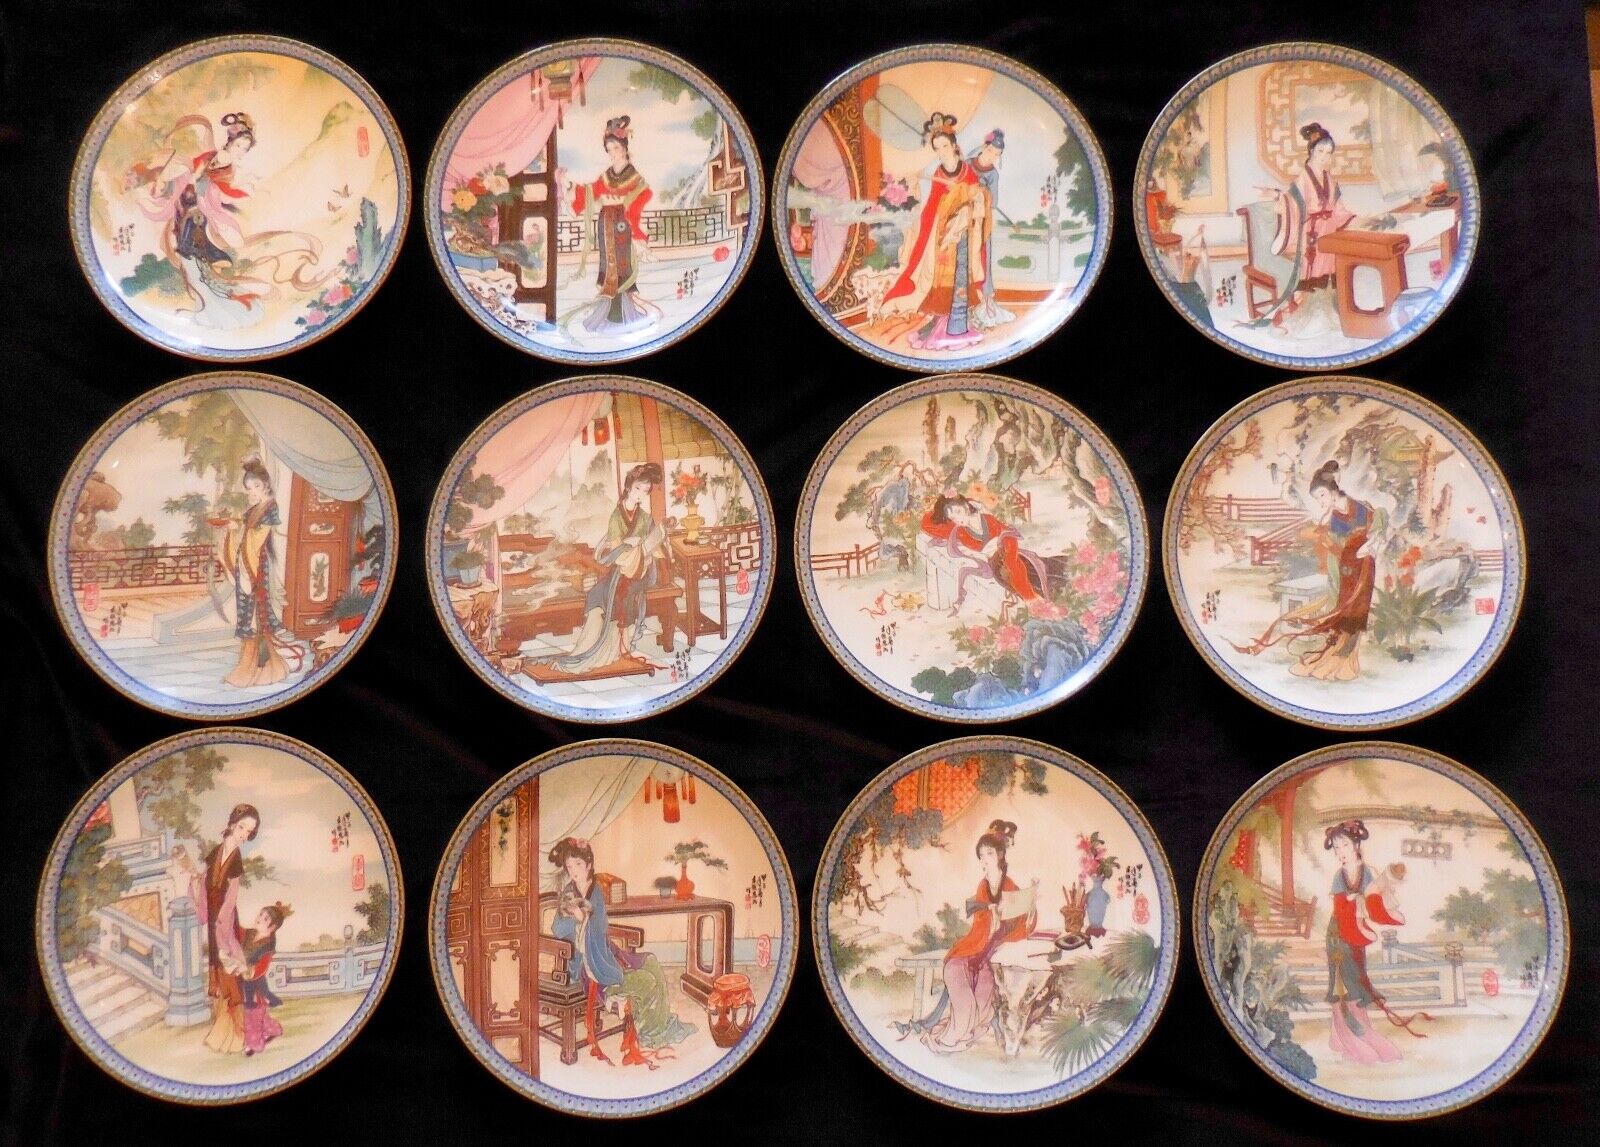 Imperial Jingdezhen 1985-1989 BEAUTIES OF THE RED MANSION complete set of 12